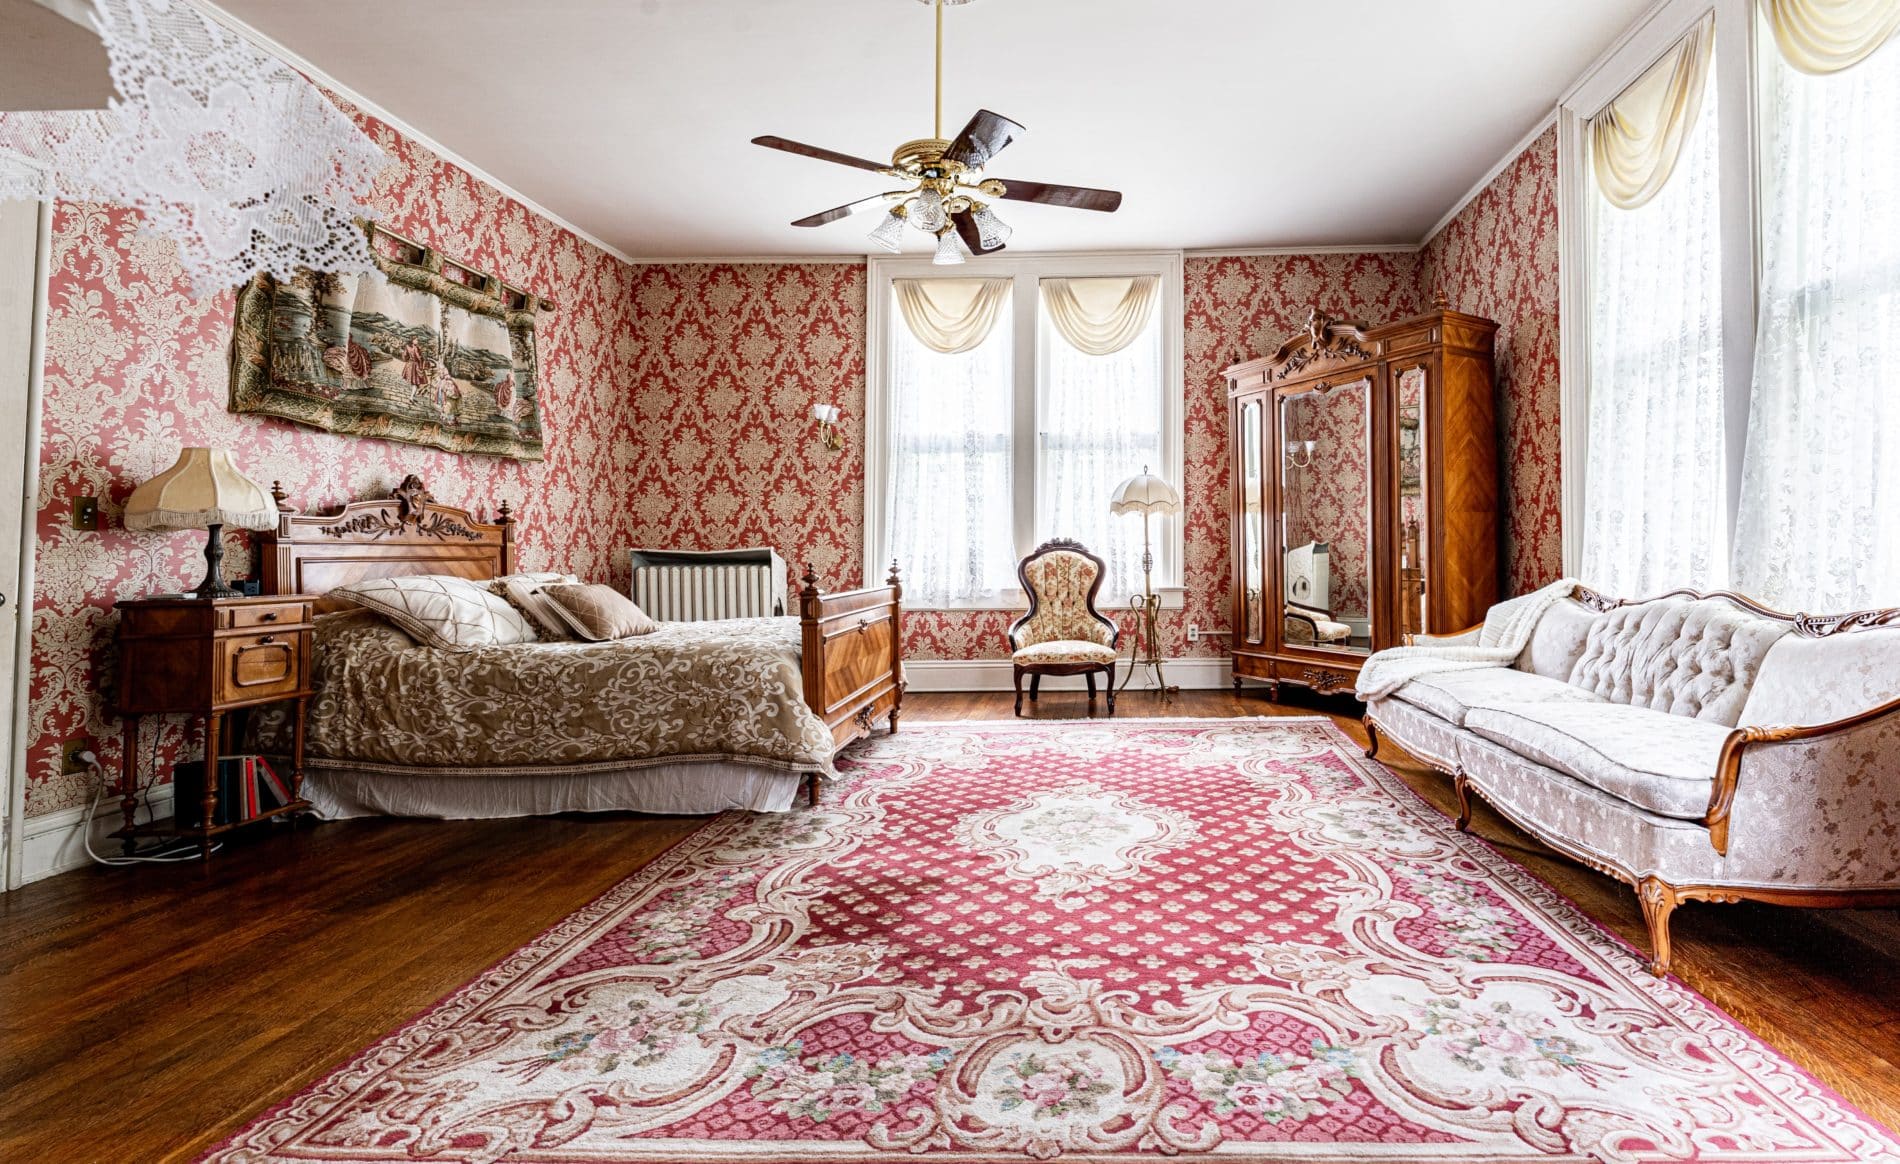 Spacious room with red and white papered walls, wood floors, wood carved bed with white bedding, and large mirrored cabinet